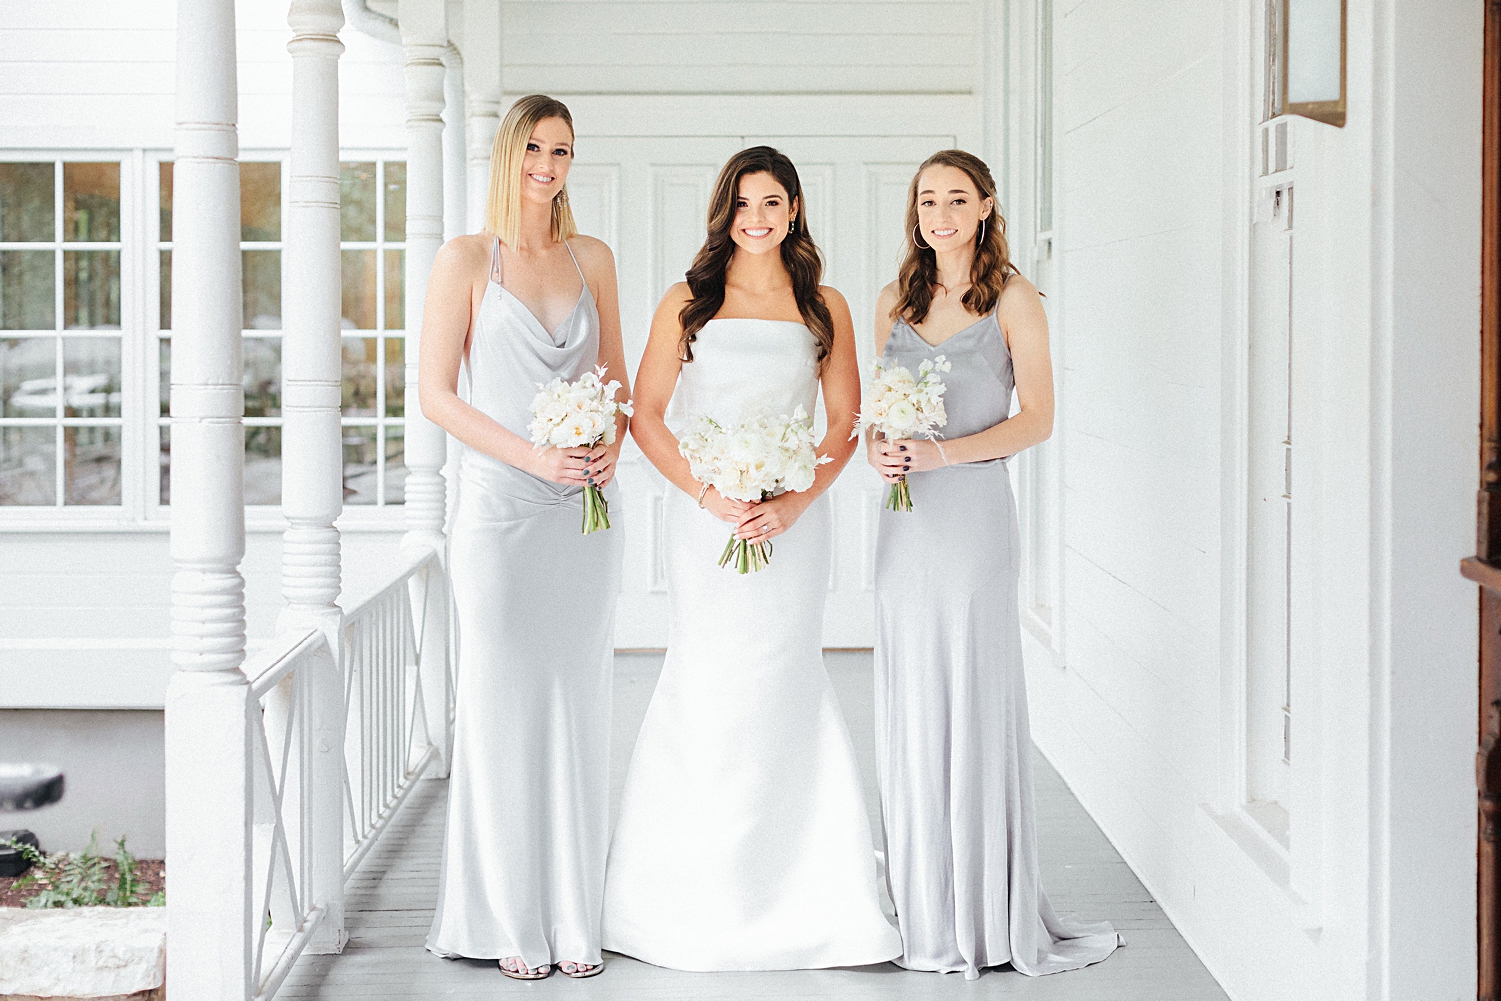 smiling bride in strapless white wedding dress standing with two bridesmaids in silver dresses bouquet